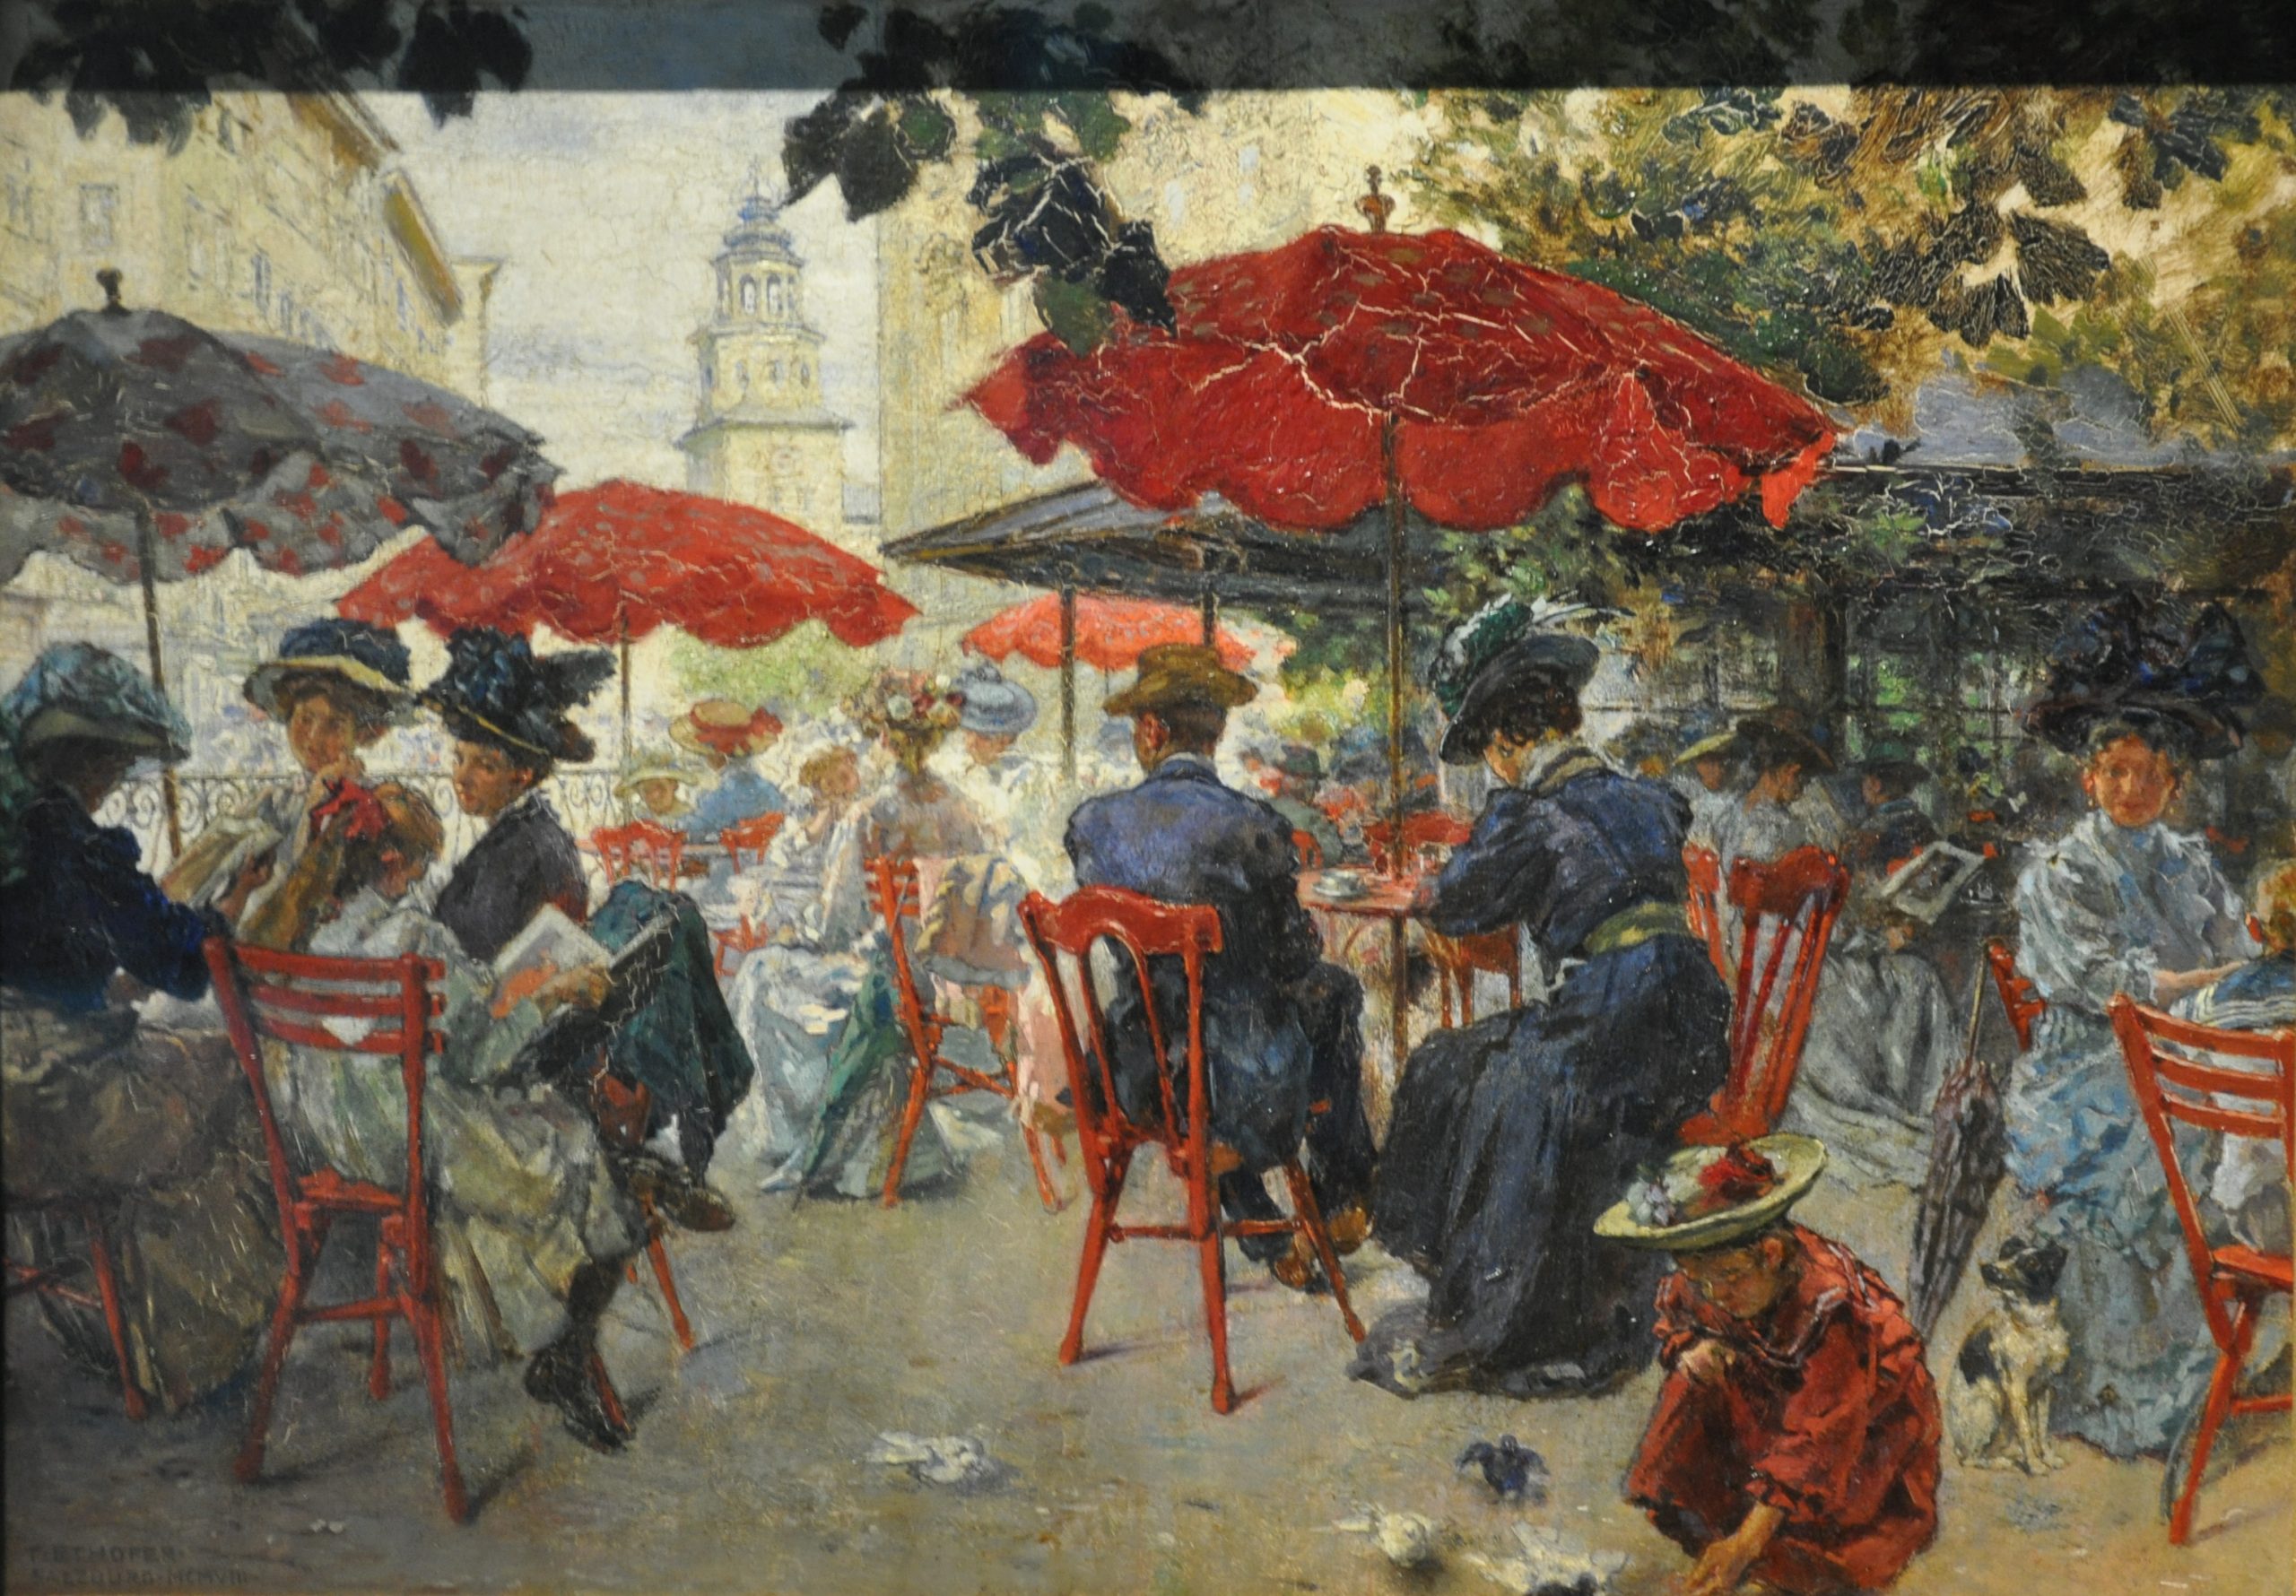 Men and women seated at an outdoor restaurant patio on a sunny day